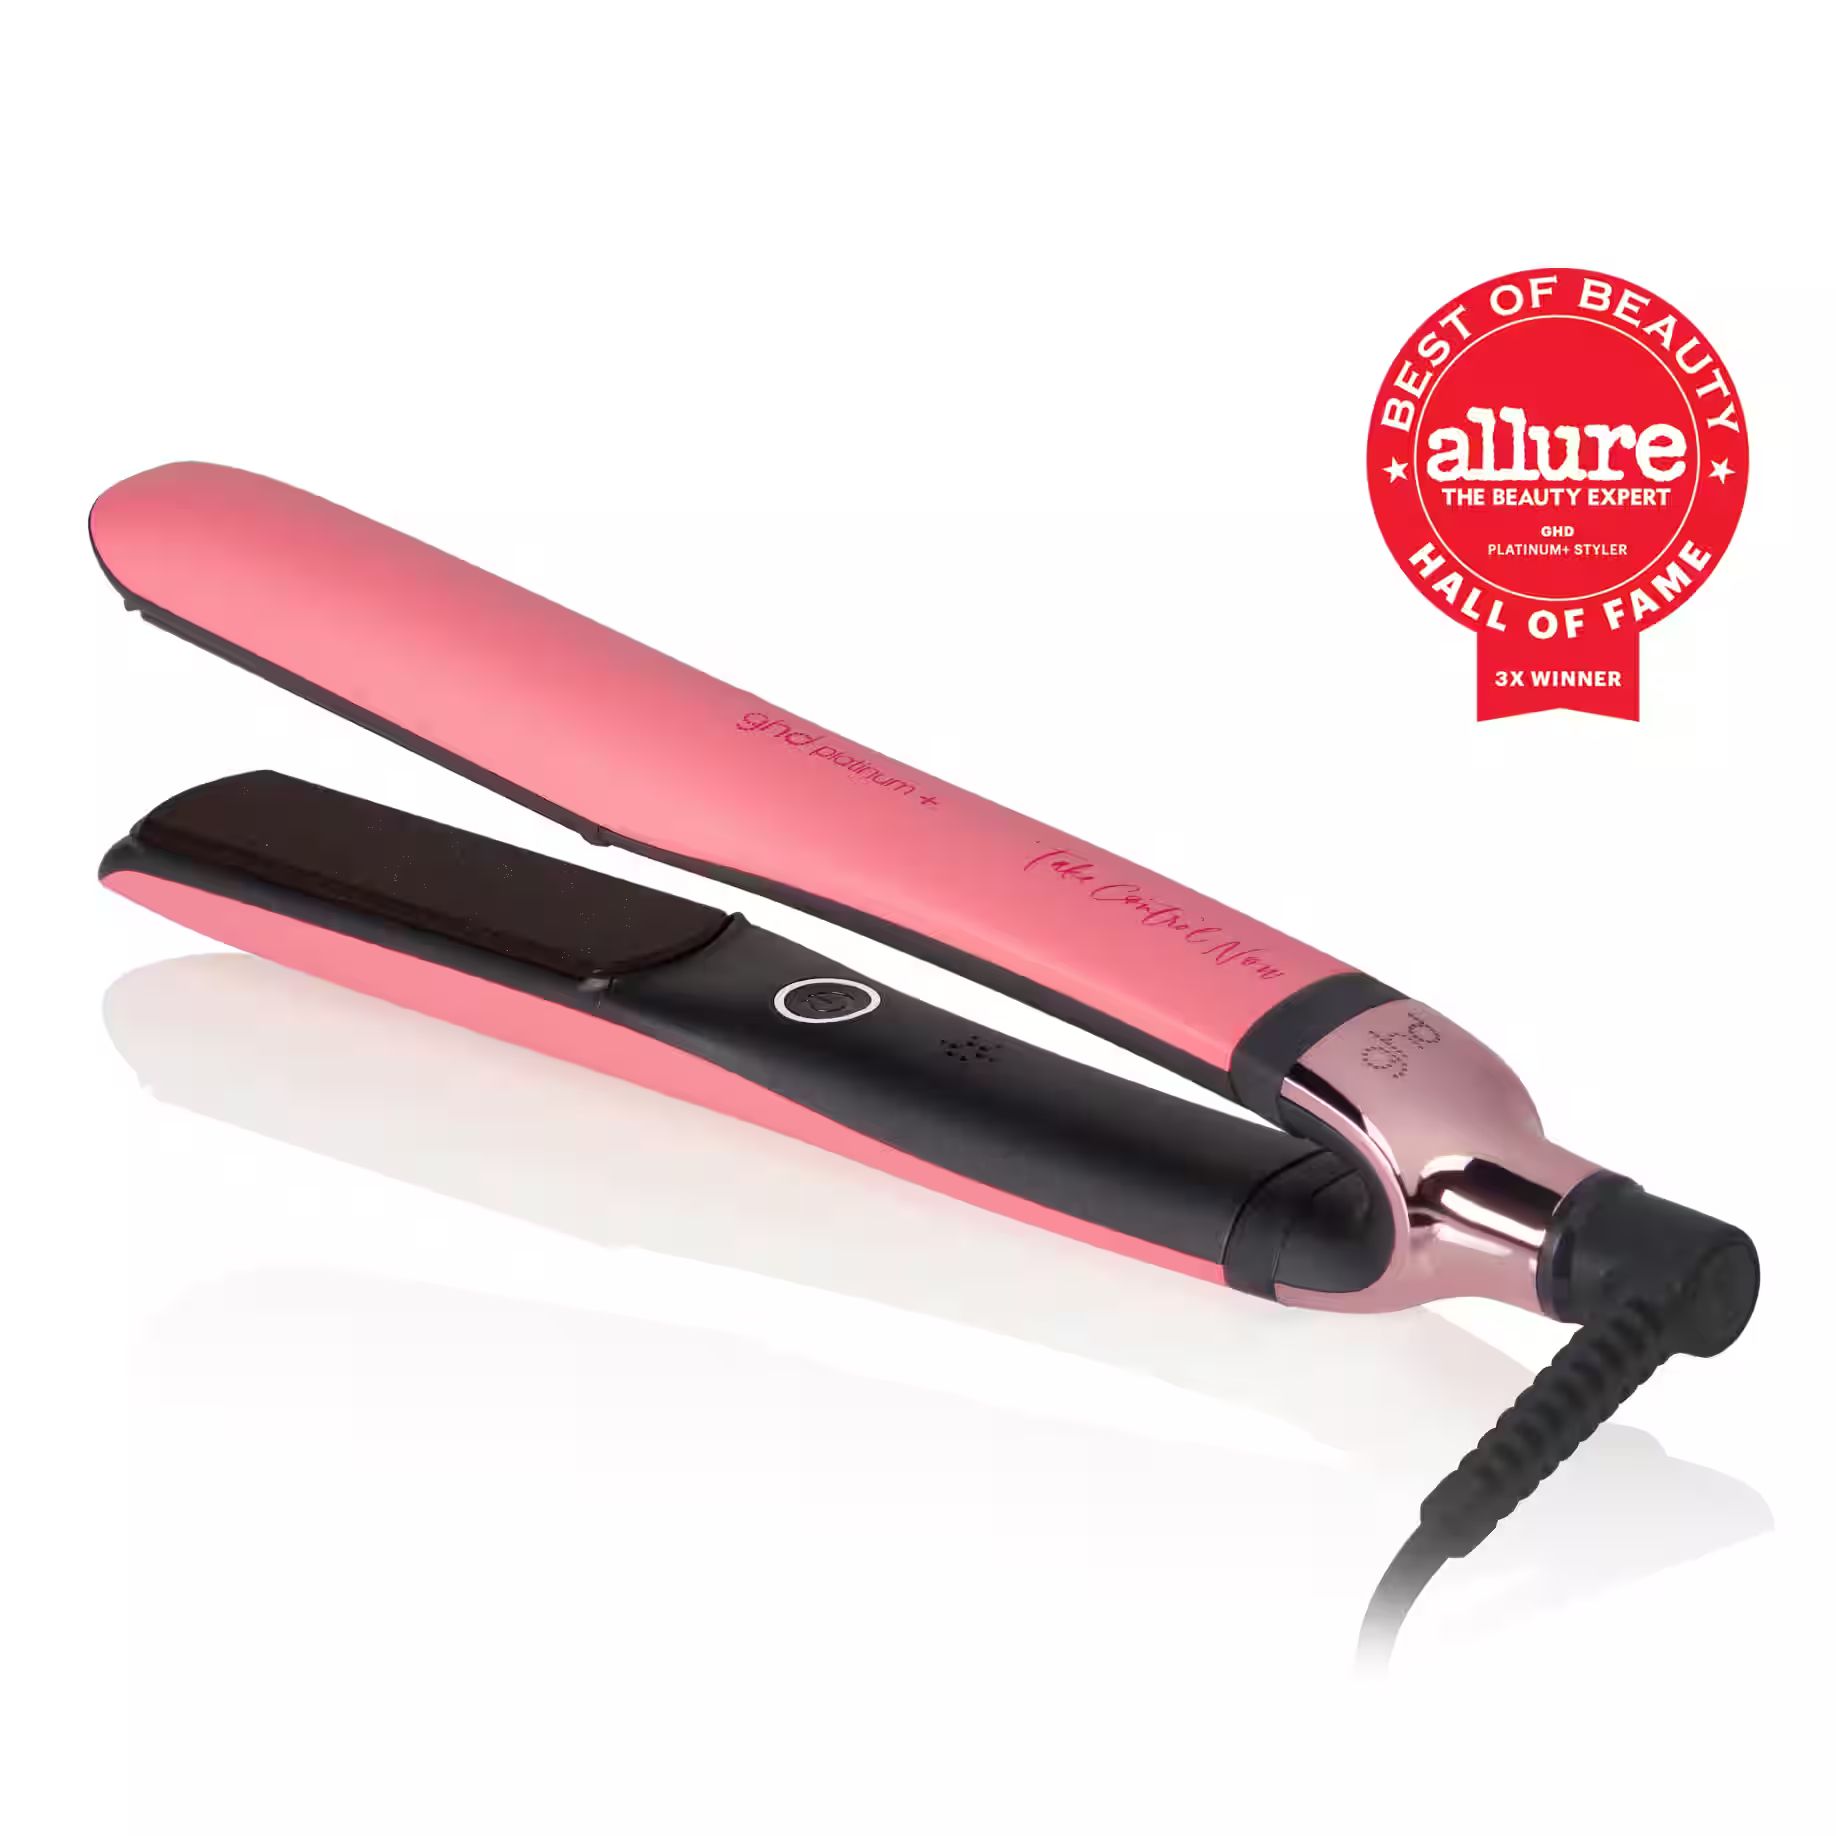 GHD PLATINUM+ STYLER - 1" FLAT IRON, PINK LIMITED EDITION | ghd (US)